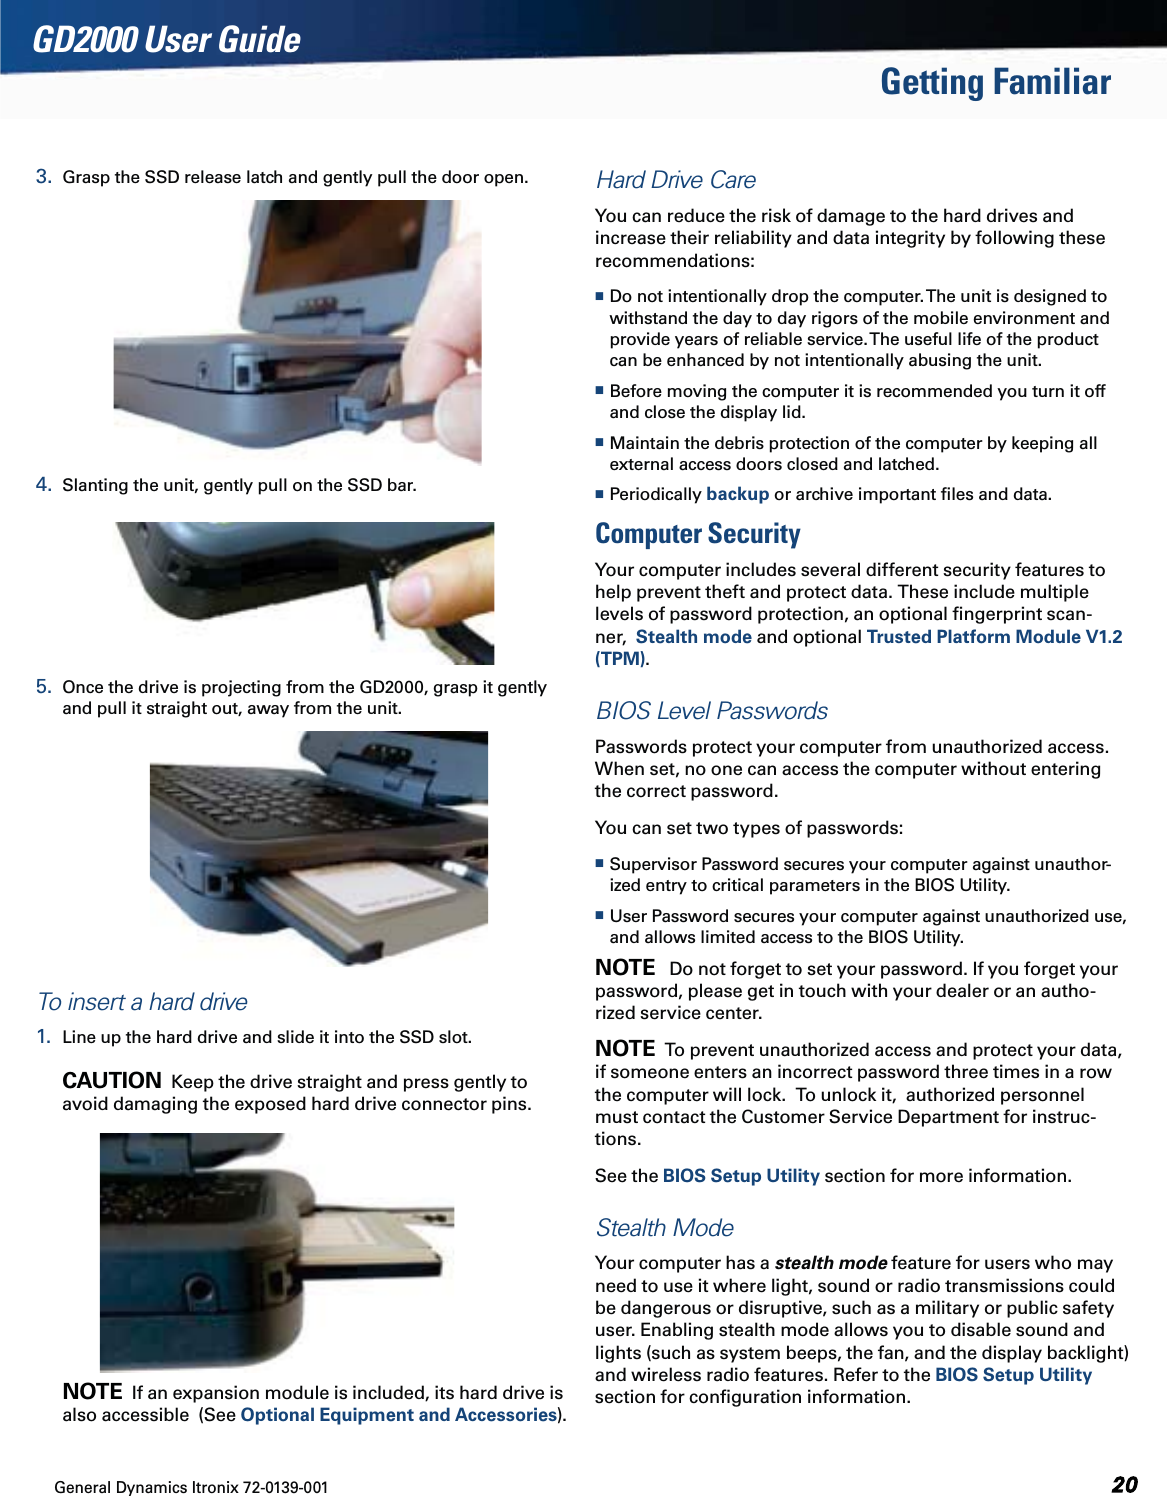 General Dynamics Itronix 72-0139-001  GD2000 User GuideGetting Familiar3.  Grasp the SSD release latch and gently pull the door open.4.  Slanting the unit, gently pull on the SSD bar.        5.  Once the drive is projecting from the GD2000, grasp it gently and pull it straight out, away from the unit. To insert a hard drive1.  Line up the hard drive and slide it into the SSD slot.  CAUTION  Keep the drive straight and press gently to avoid damaging the exposed hard drive connector pins.  NOTE  If an expansion module is included, its hard drive is also accessible  (See Optional Equipment and Accessories).Hard Drive CareYou can reduce the risk of damage to the hard drives and increase their reliability and data integrity by following these recommendations: Do not intentionally drop the computer. The unit is designed to withstand the day to day rigors of the mobile environment and provide years of reliable service. The useful life of the product can be enhanced by not intentionally abusing the unit. Before moving the computer it is recommended you turn it off and close the display lid.   Maintain the debris protection of the computer by keeping all external access doors closed and latched. Periodically backup or archive important ﬁles and data.Computer SecurityYour computer includes several different security features to help prevent theft and protect data. These include multiple levels of password protection, an optional ﬁngerprint scan-ner,  Stealth mode and optional Trusted Platform Module V1.2 (TPM).BIOS Level PasswordsPasswords protect your computer from unauthorized access. When set, no one can access the computer without entering the correct password. You can set two types of passwords: Supervisor Password secures your computer against unauthor-ized entry to critical parameters in the BIOS Utility. User Password secures your computer against unauthorized use, and allows limited access to the BIOS Utility.NOTE   Do not forget to set your password. If you forget your password, please get in touch with your dealer or an autho-rized service center.NOTE  To prevent unauthorized access and protect your data, if someone enters an incorrect password three times in a row the computer will lock.  To unlock it,  authorized personnel must contact the Customer Service Department for instruc-tions.See the BIOS Setup Utility section for more information.Stealth ModeYour computer has a stealth mode feature for users who may need to use it where light, sound or radio transmissions could be dangerous or disruptive, such as a military or public safety user. Enabling stealth mode allows you to disable sound and lights (such as system beeps, the fan, and the display backlight) and wireless radio features. Refer to the BIOS Setup Utility section for conﬁguration information.